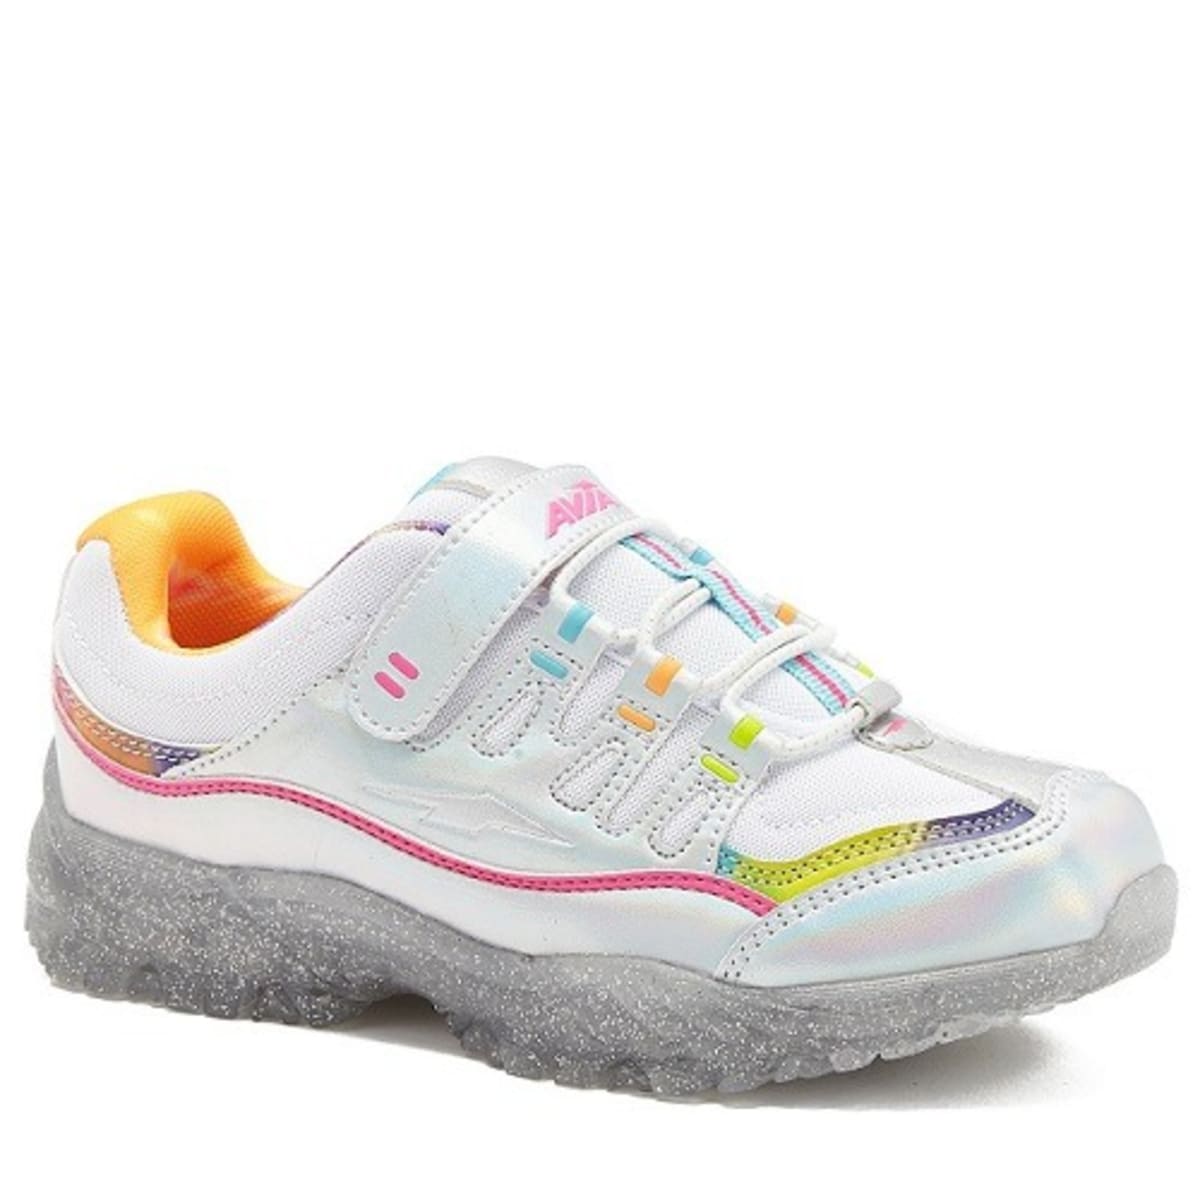 Avia Chunky Light Up Athletic Girls Sneaker Shoes